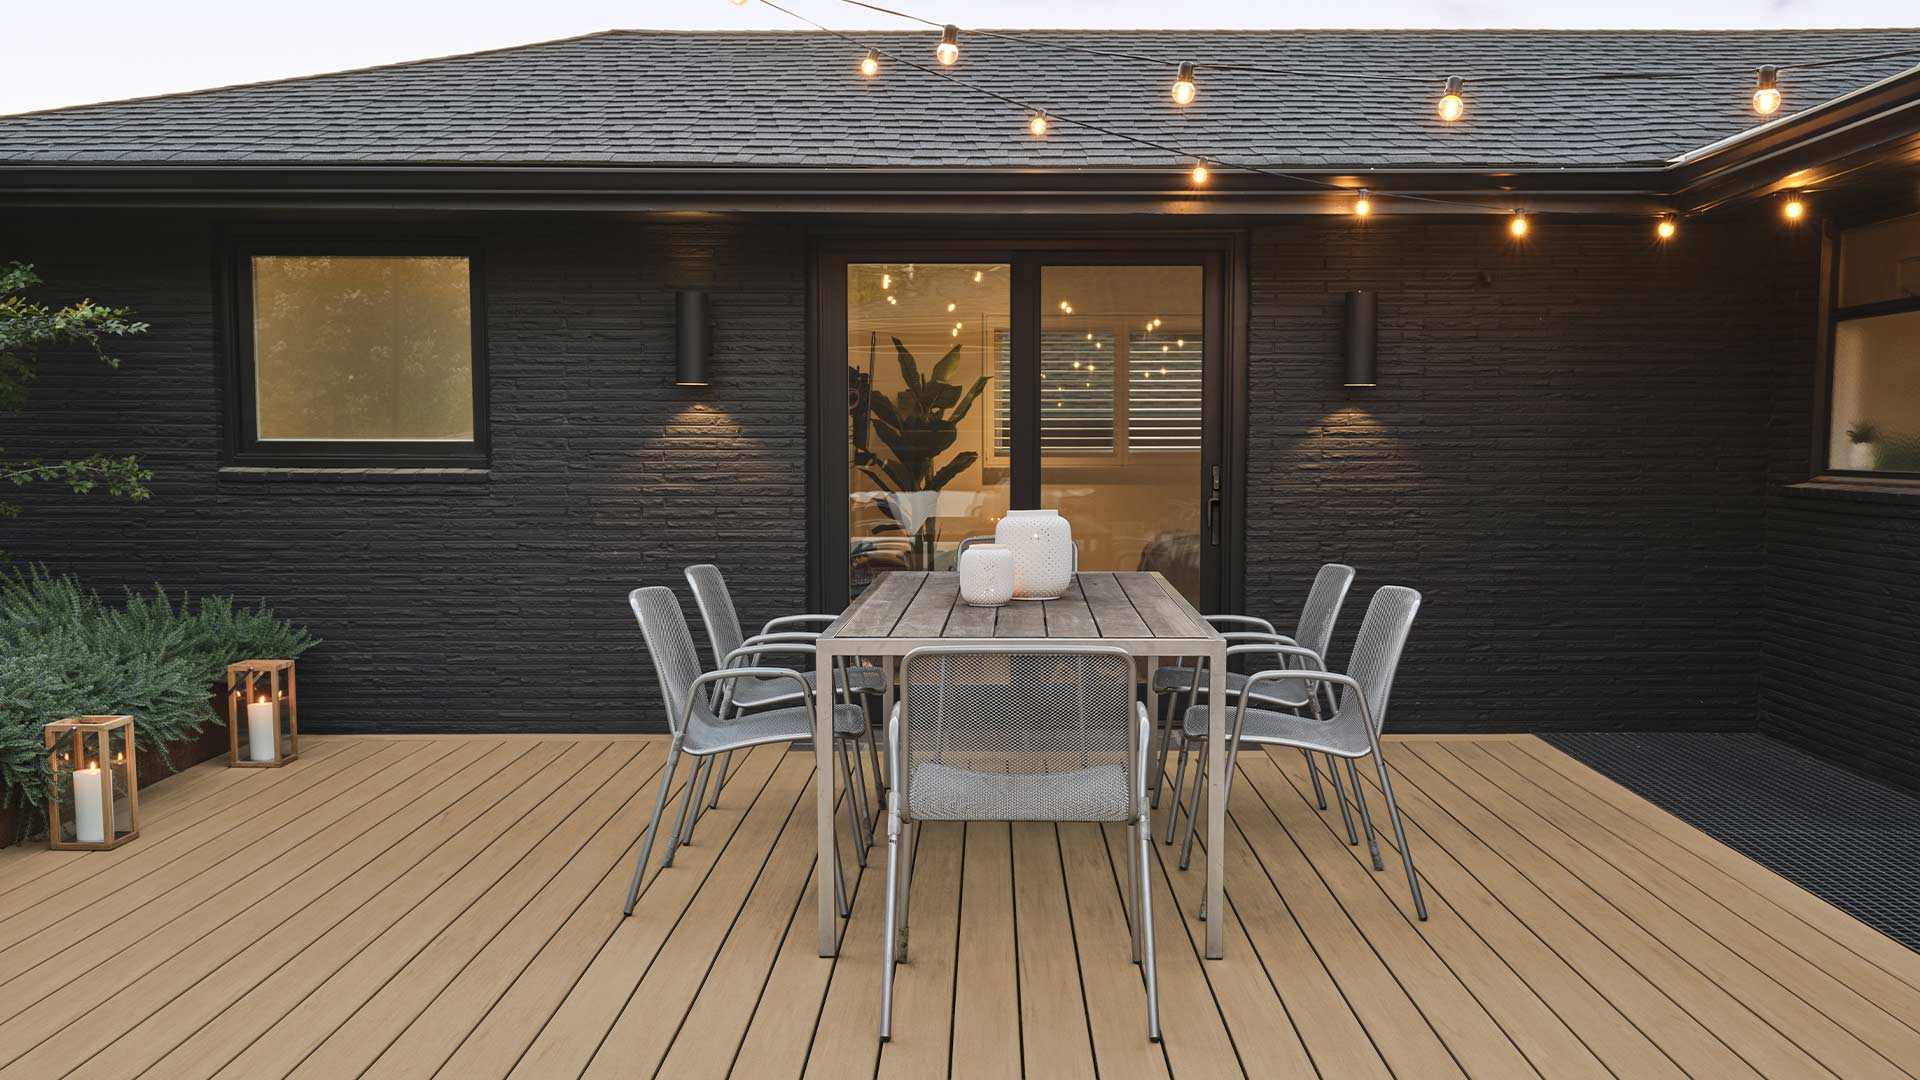 Black painted brick home with a light tan deck and string lights overhead